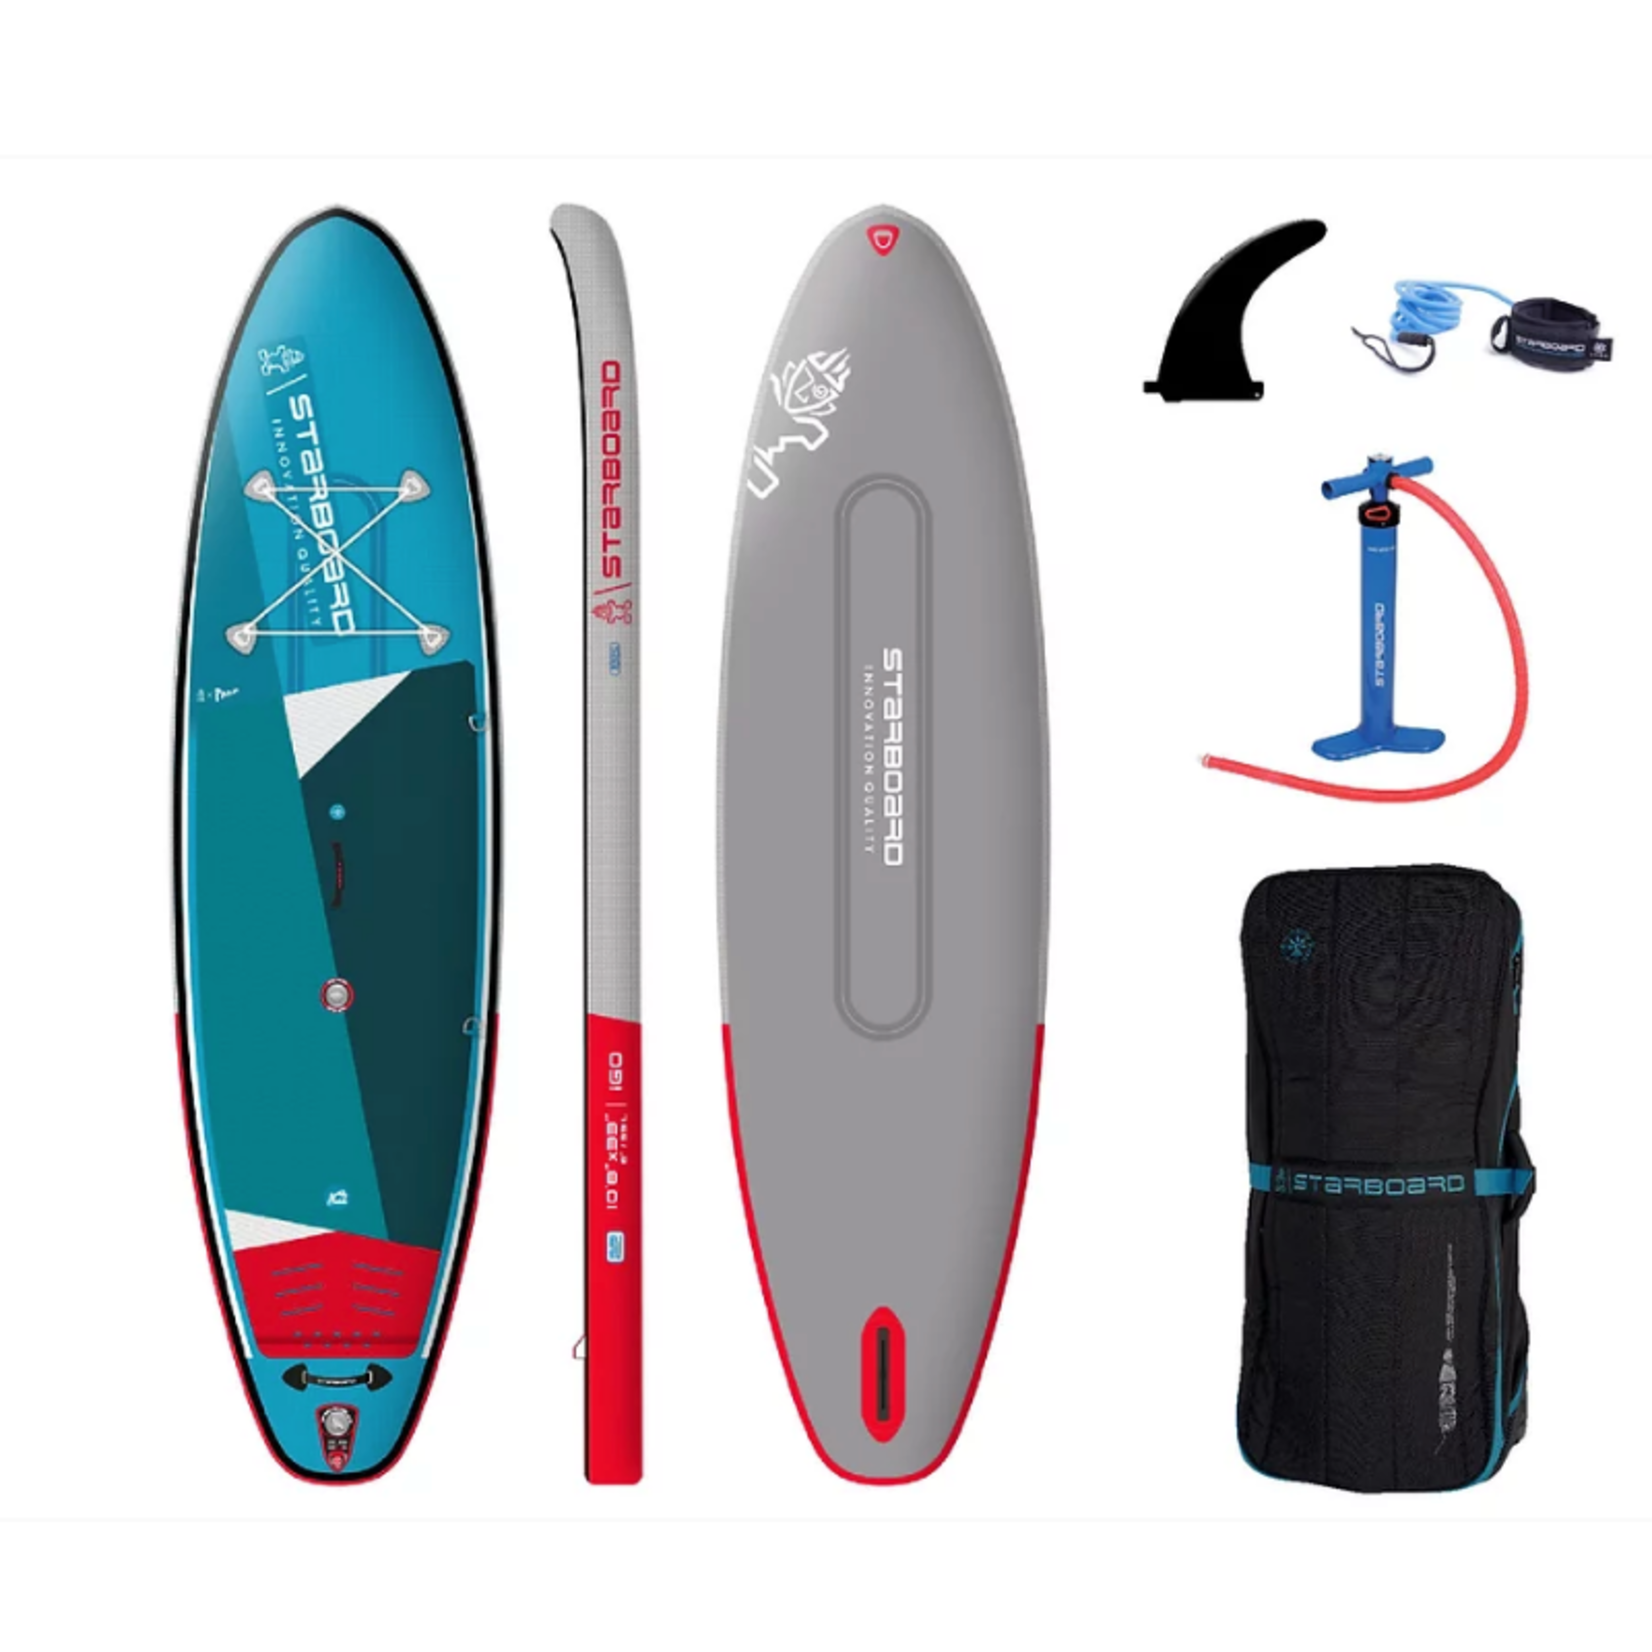 Starboard 11'2" X 31 Starboard Inflatable SUP  iGO ZenSC with Paddle